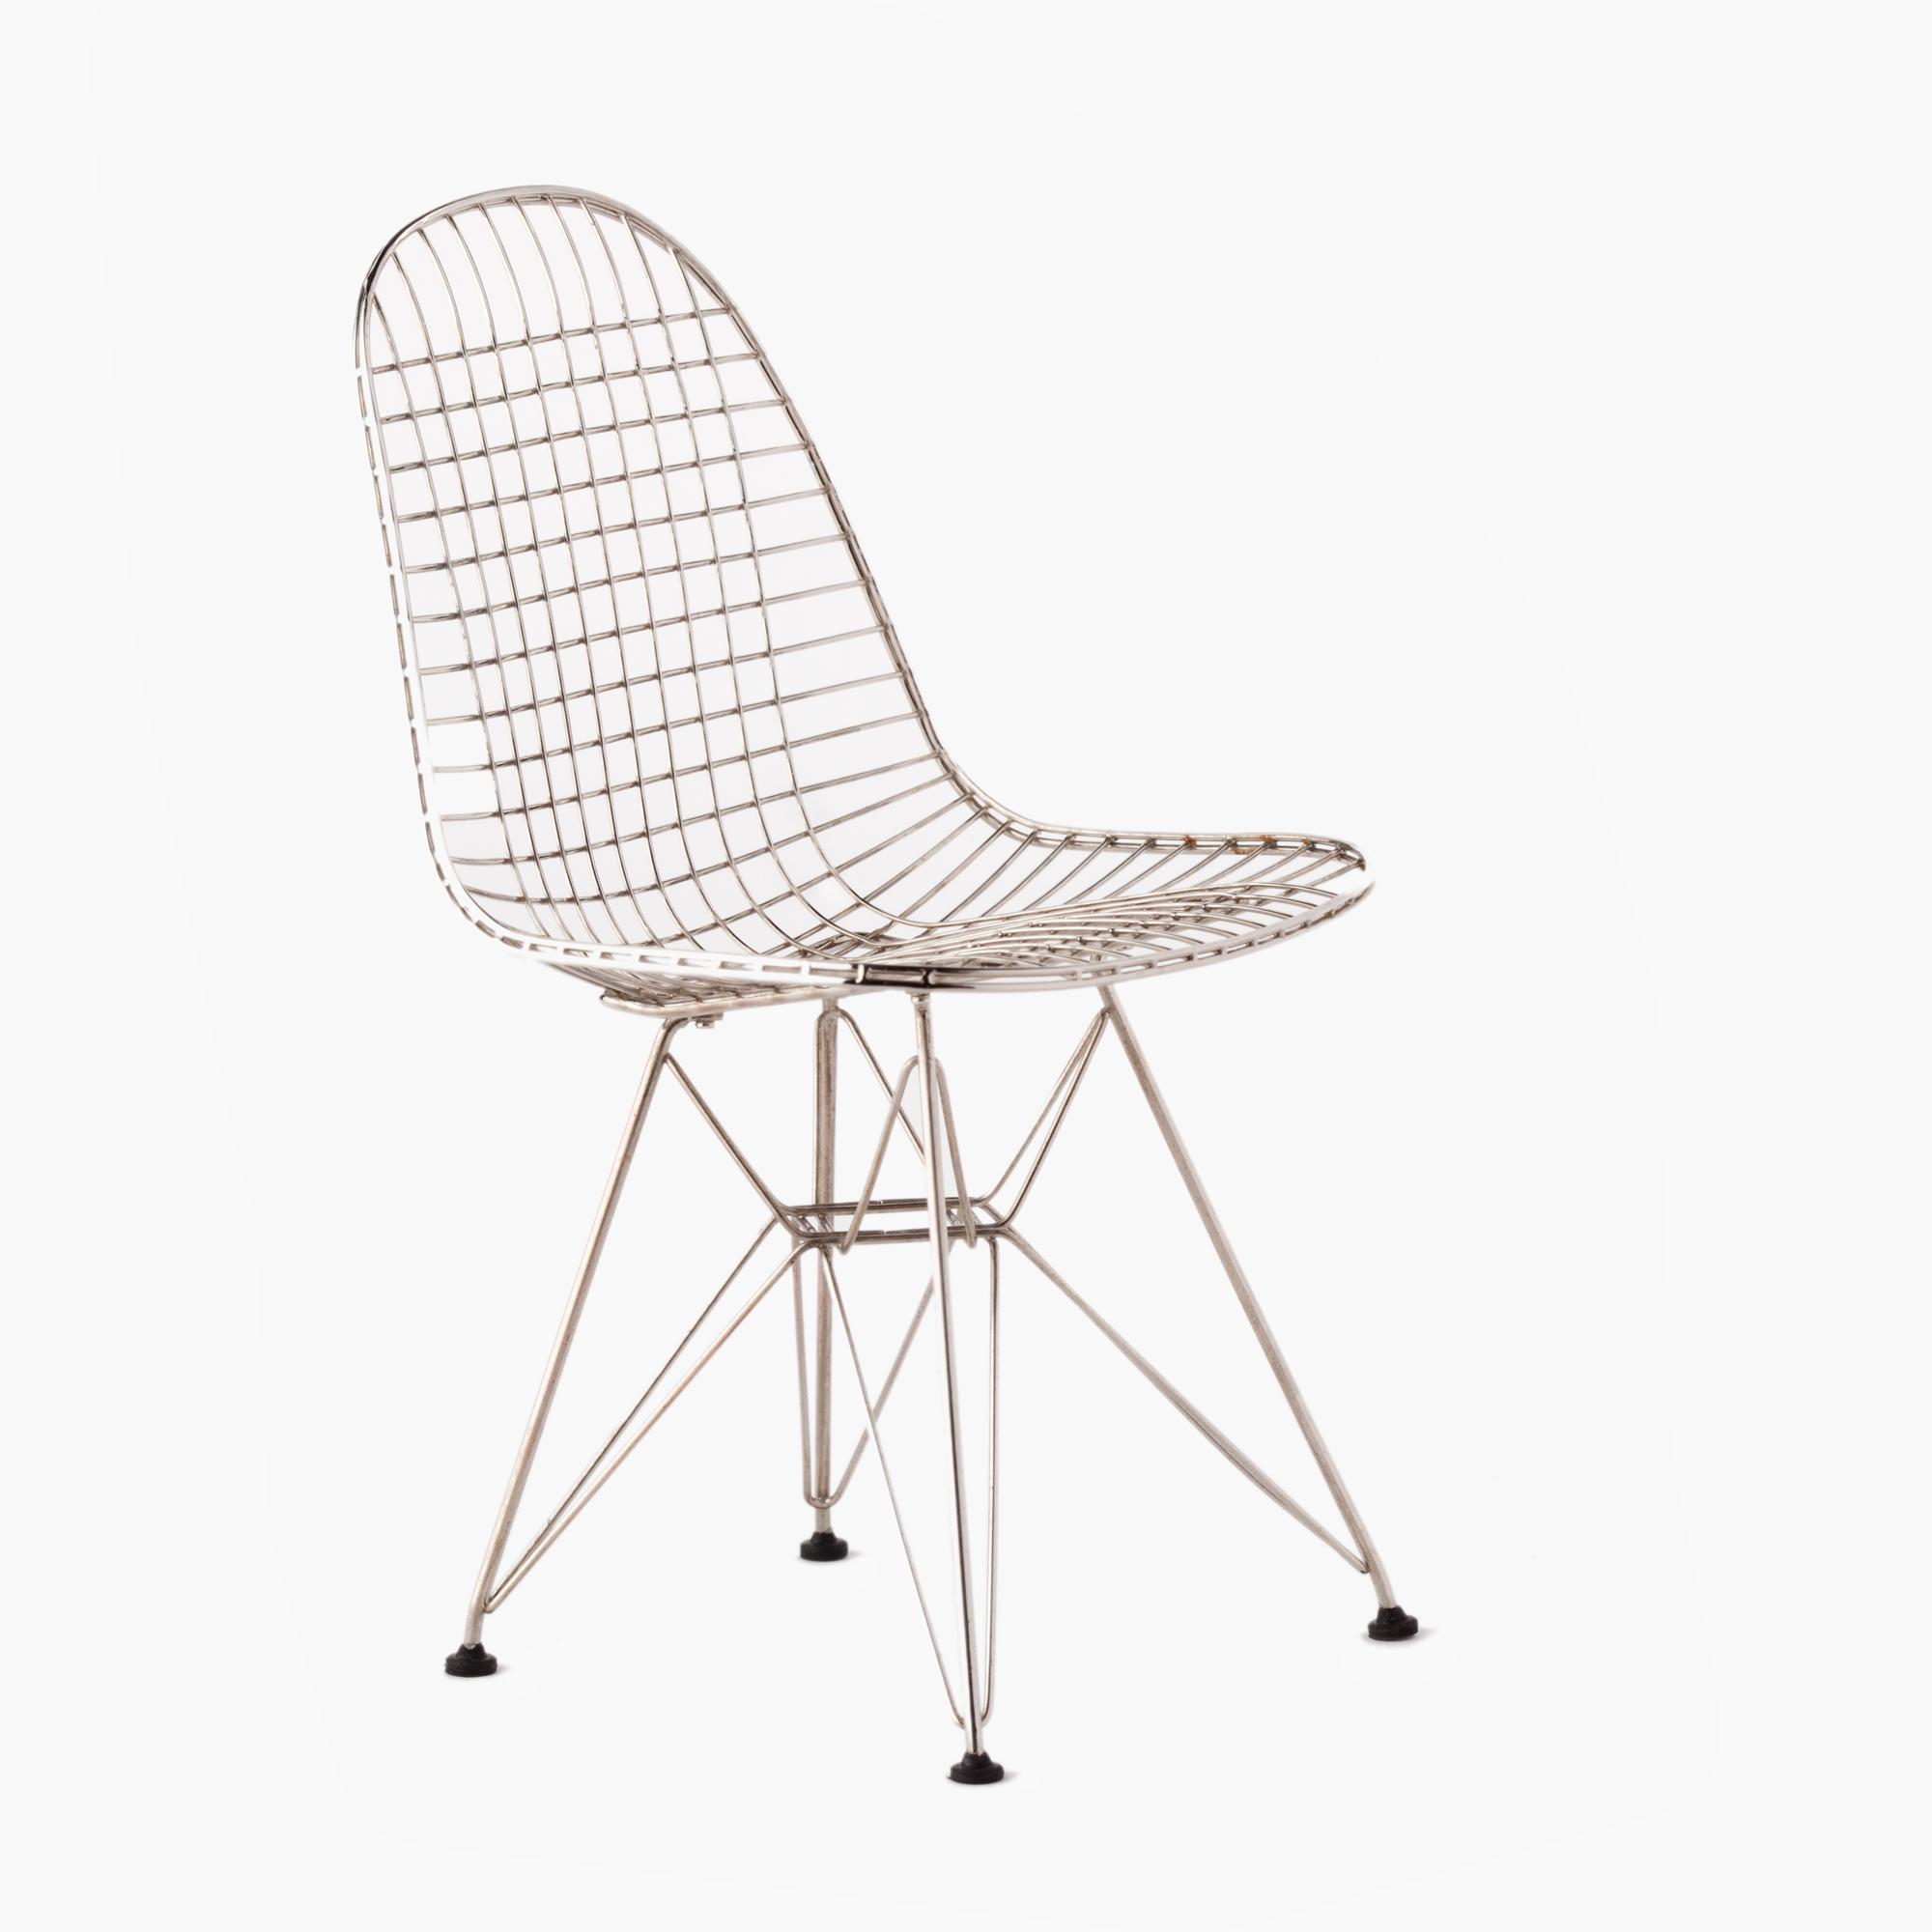 Miniature Charles & Ray Eames’s DKR Wire Chair, 1951